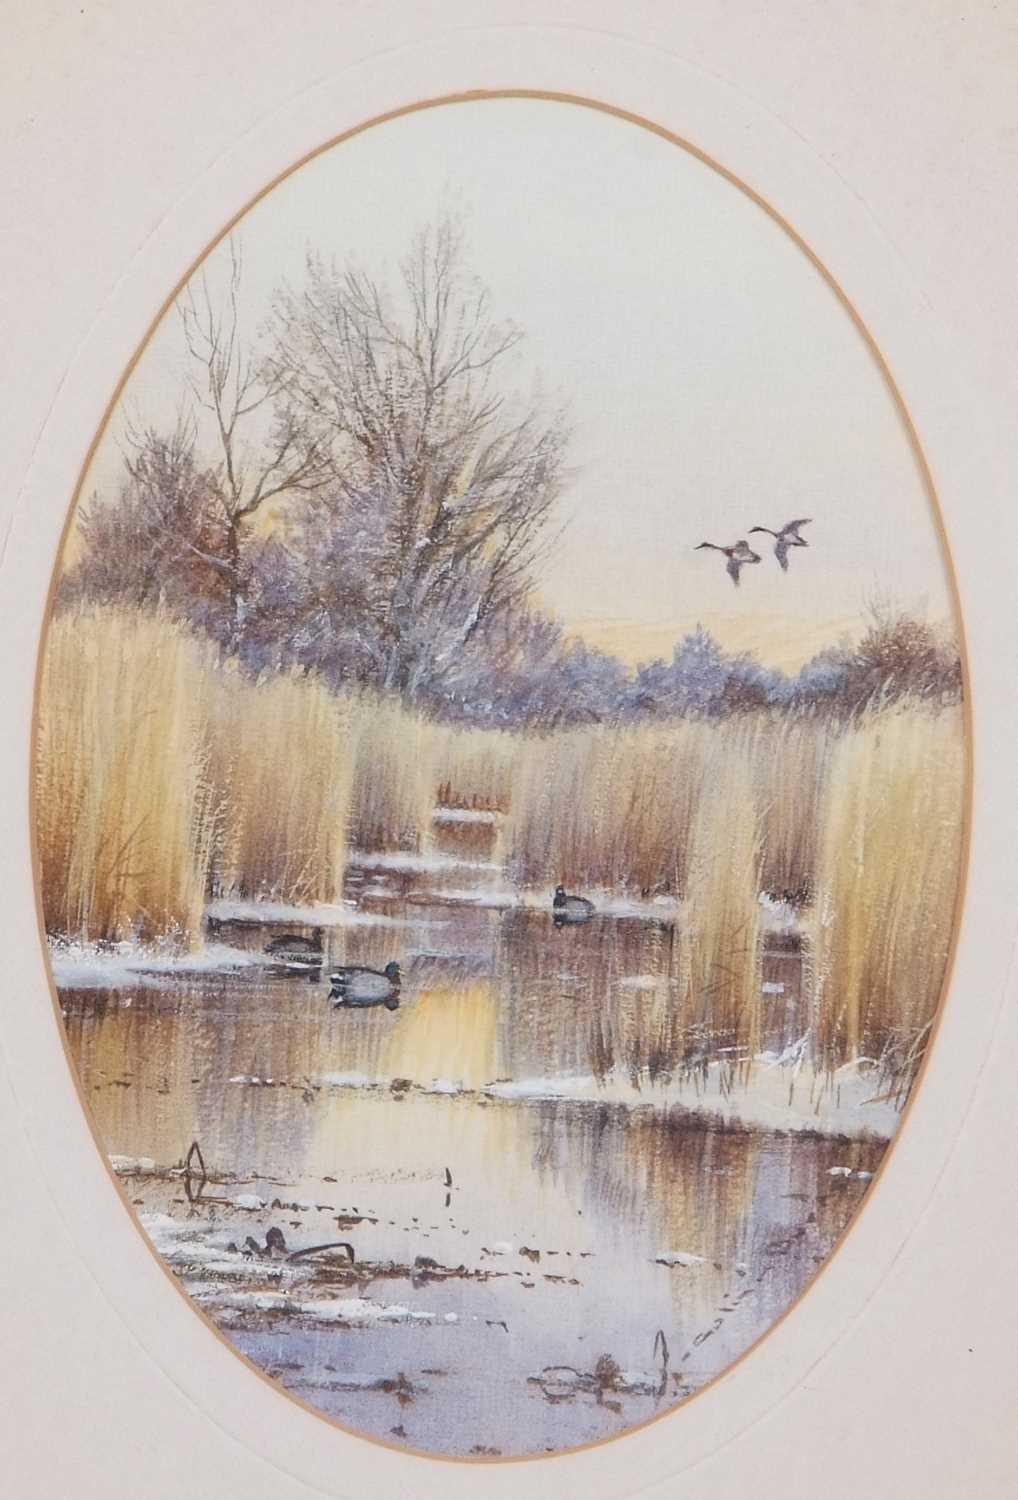 Colin Burns (British, b.1944), "Strumpshaw", watercolour in oval, signed,11x15cm, framed. - Image 3 of 3